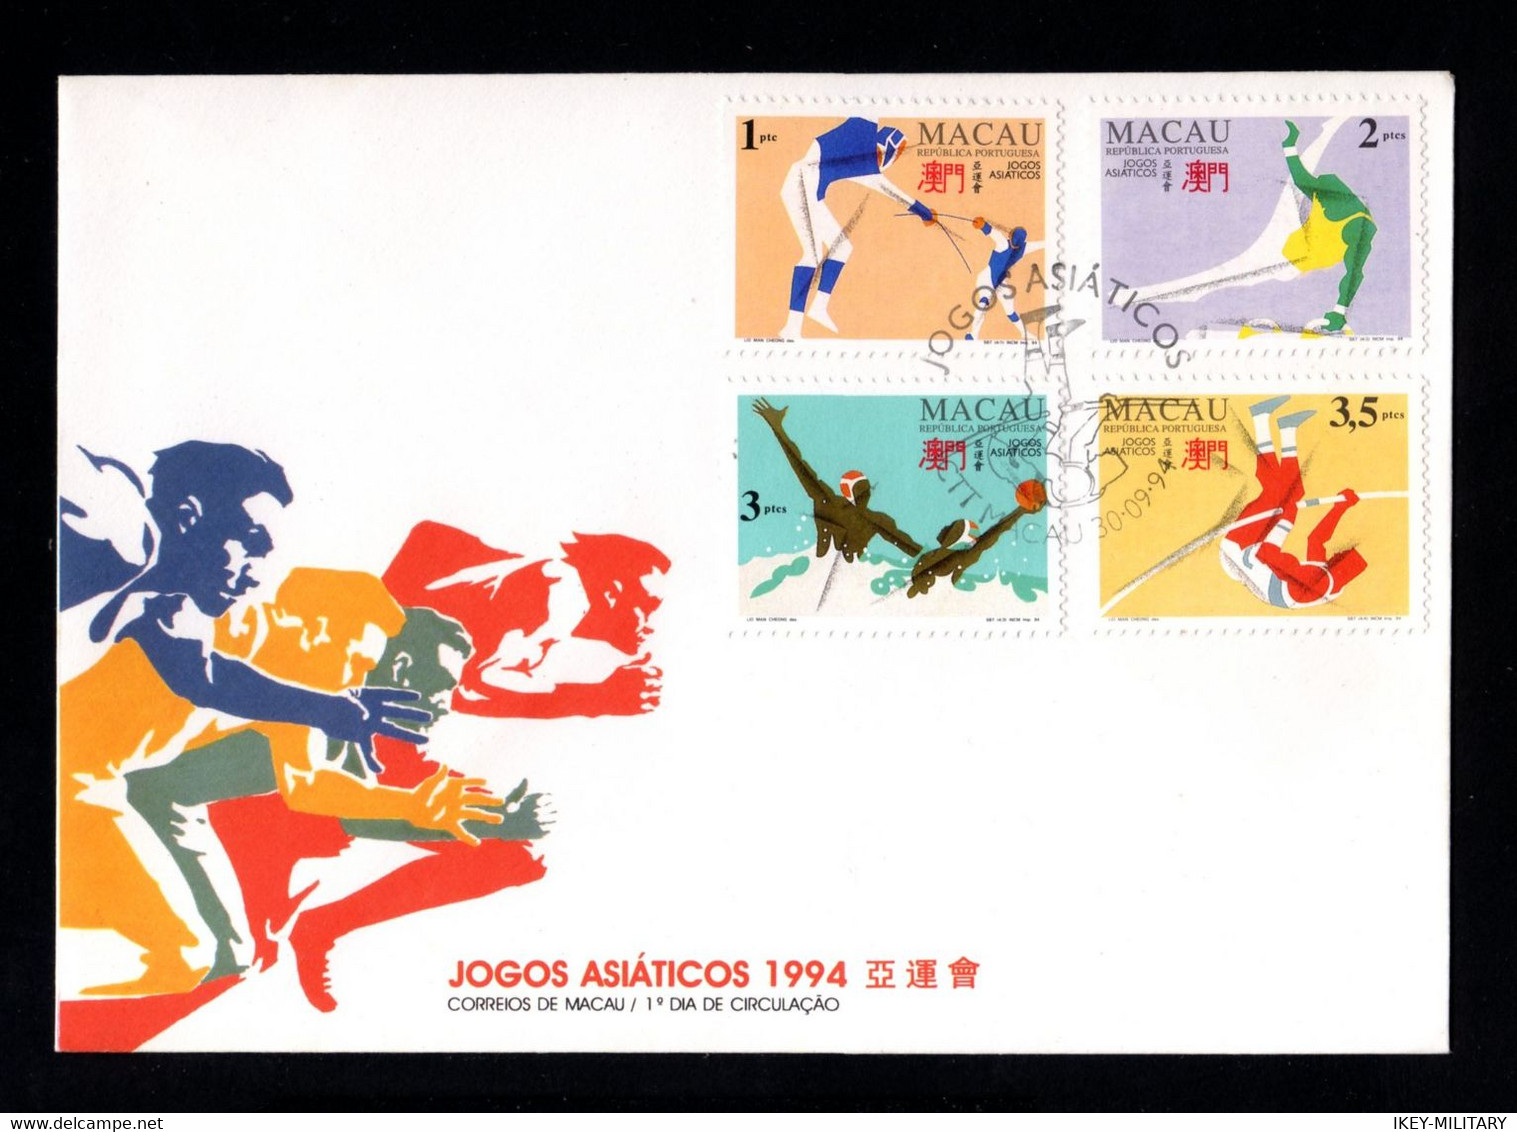 1931-MACAU-CHINA-FIRST DAY COVER MACAO.1994.ASIAN GAMES.1º DIA.Portugal Colonies.Premier Jour.Brief.FDC. - FDC